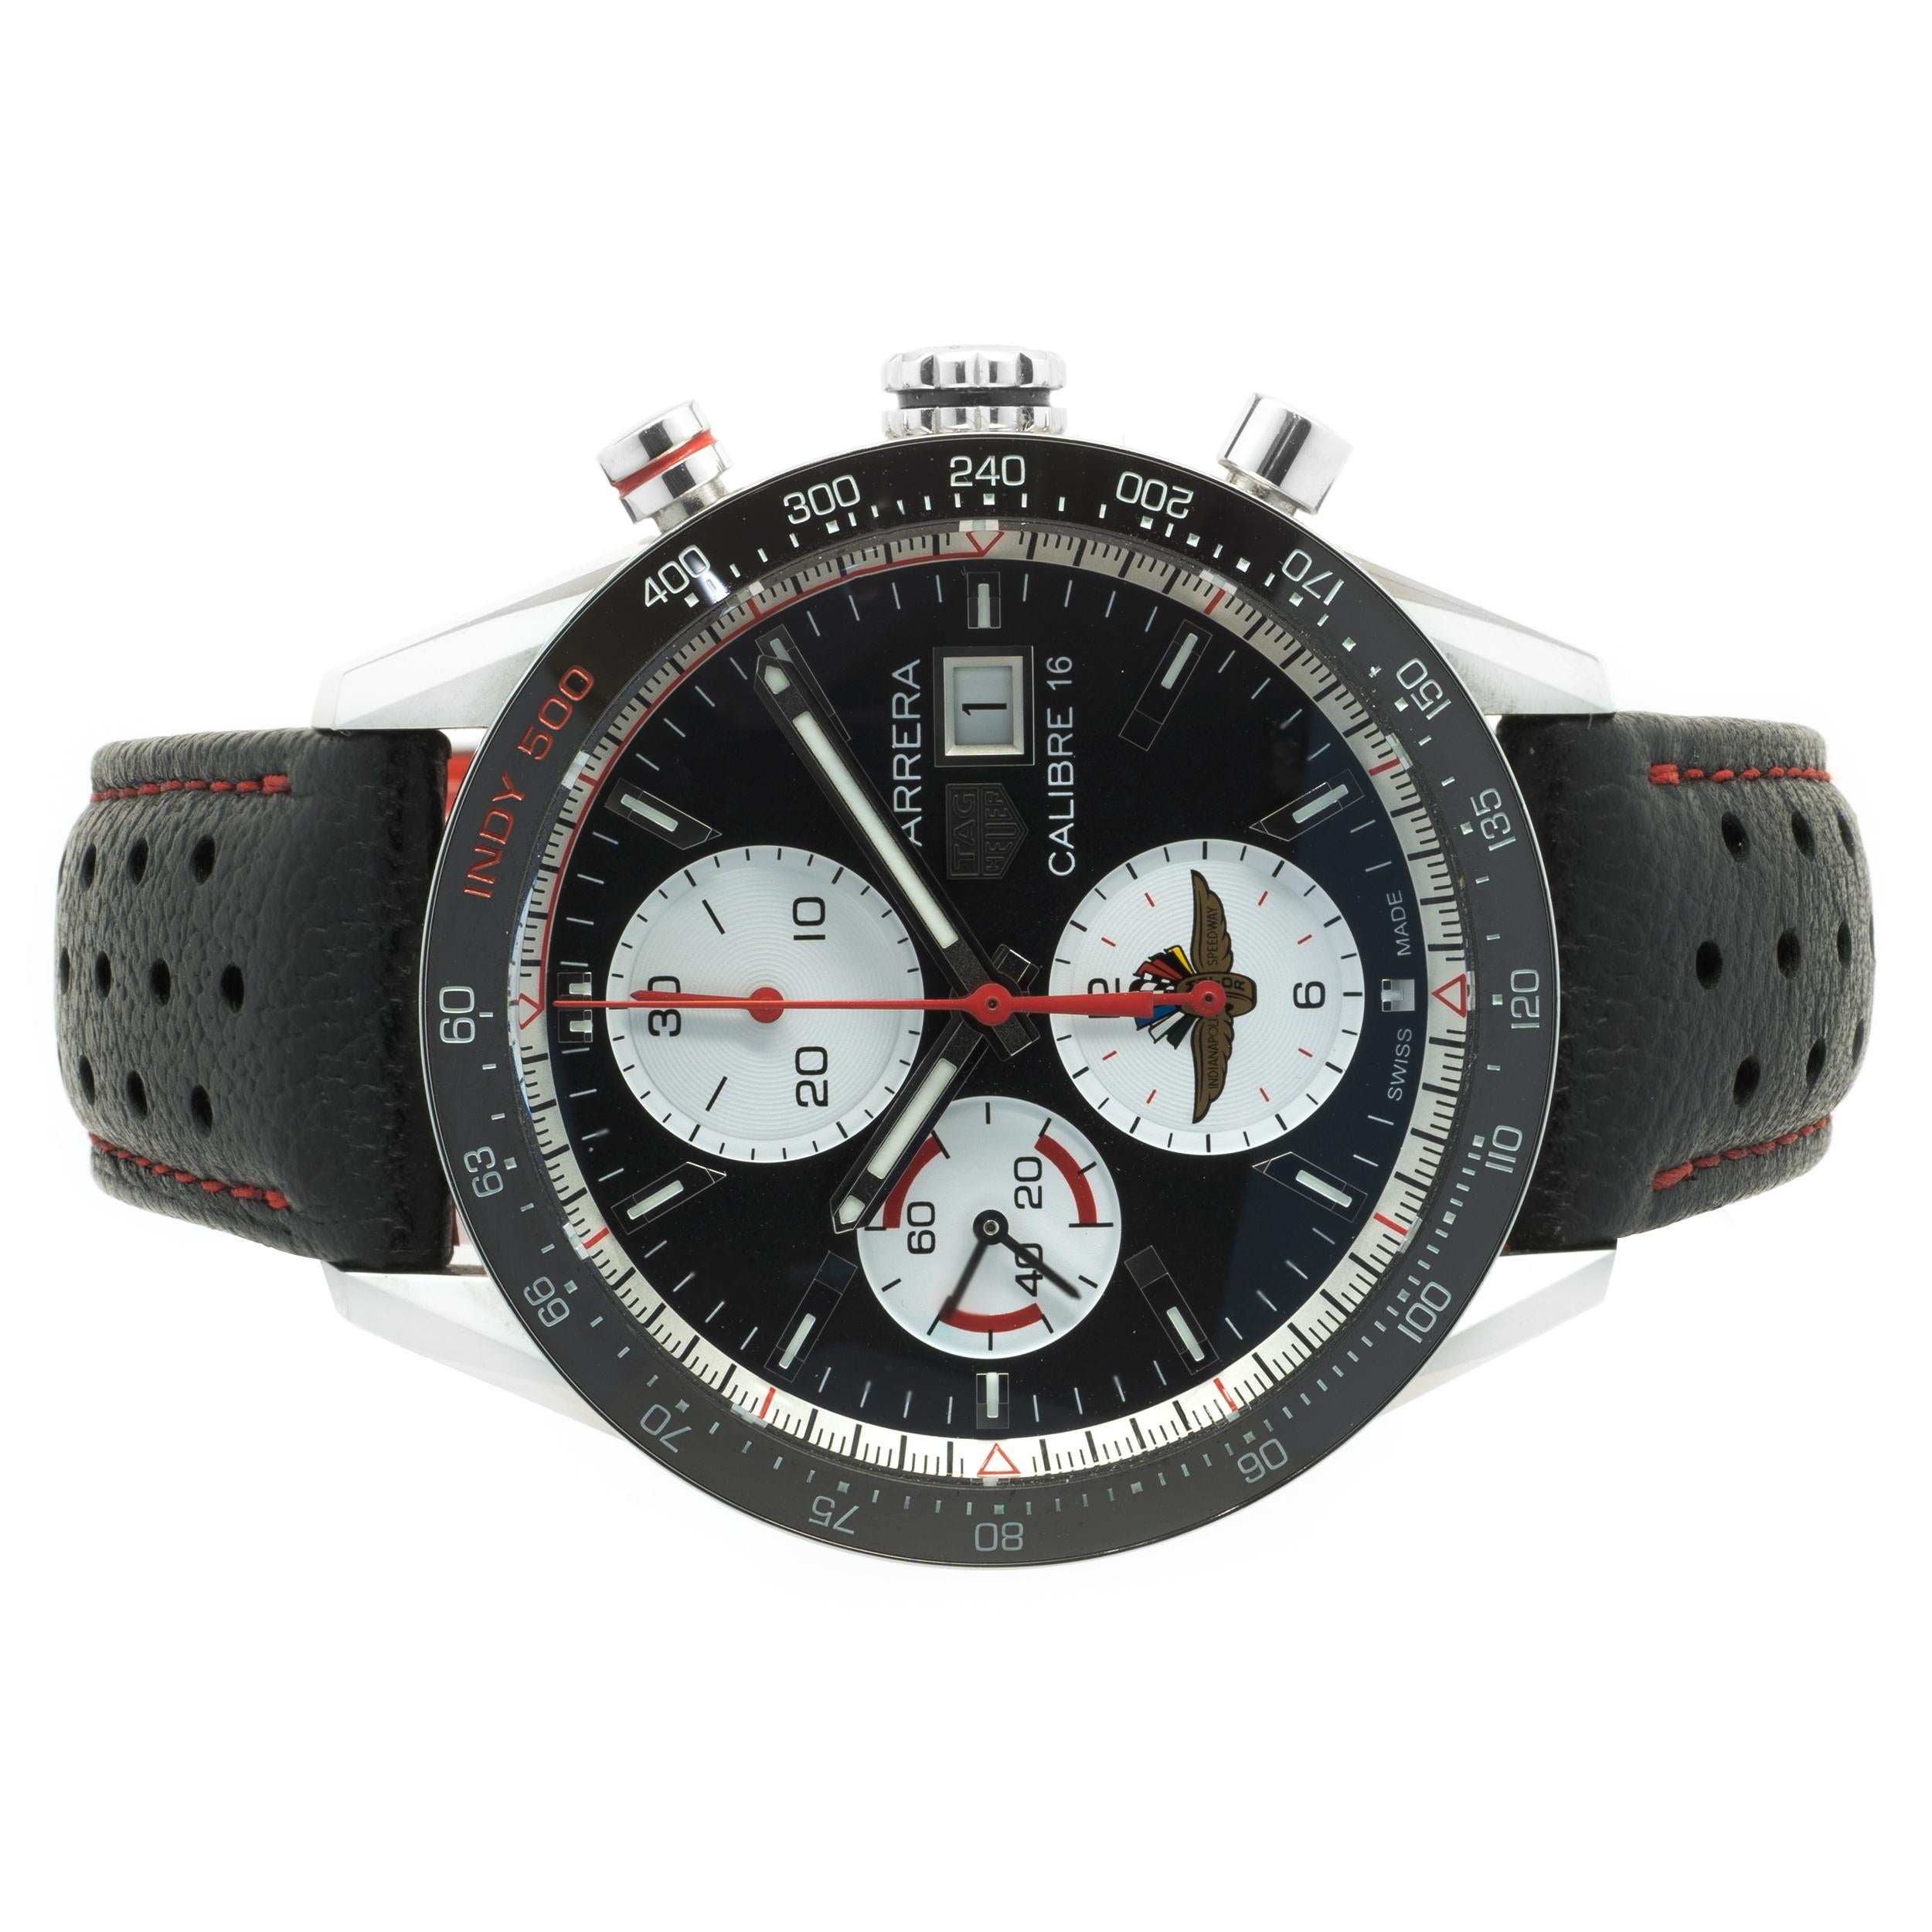 Tag Heuer Indy 500 Watch - For Sale on 1stDibs | tag heuer indy 500 price, tag  heuer indy 500 second hand, tag heuer indy 500 watch 2023